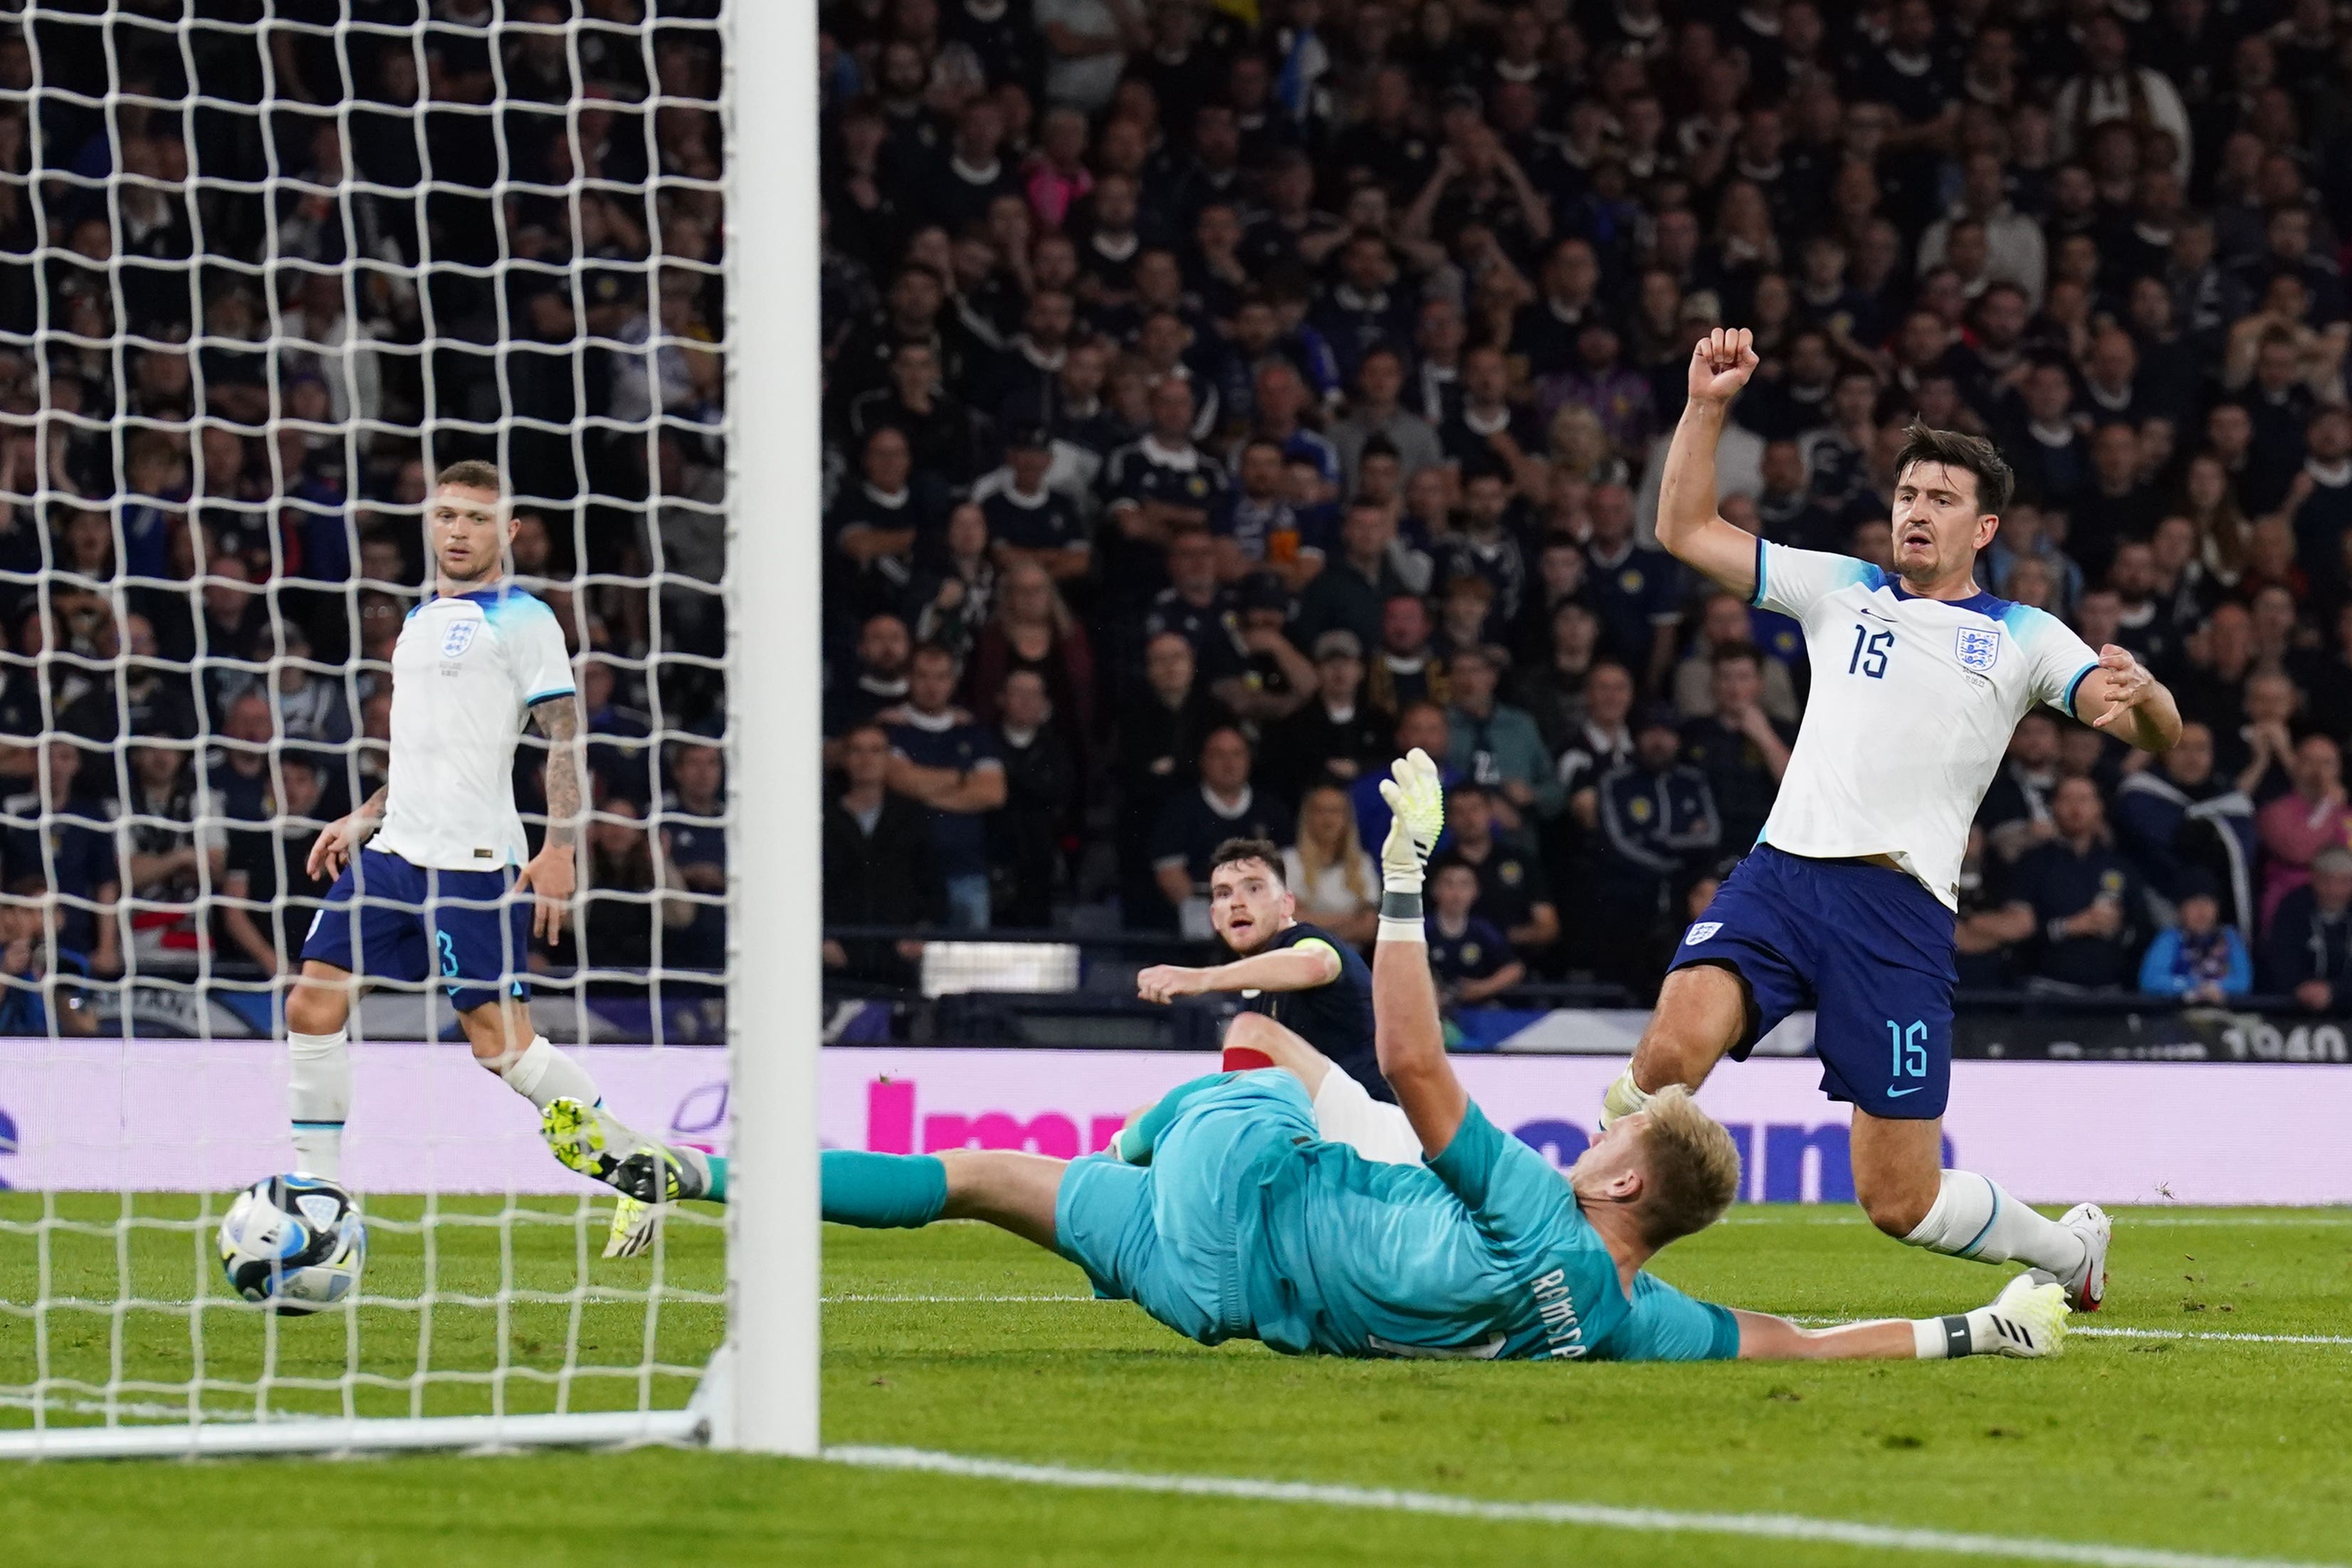 Harry Maguire put through his own net against Scotland